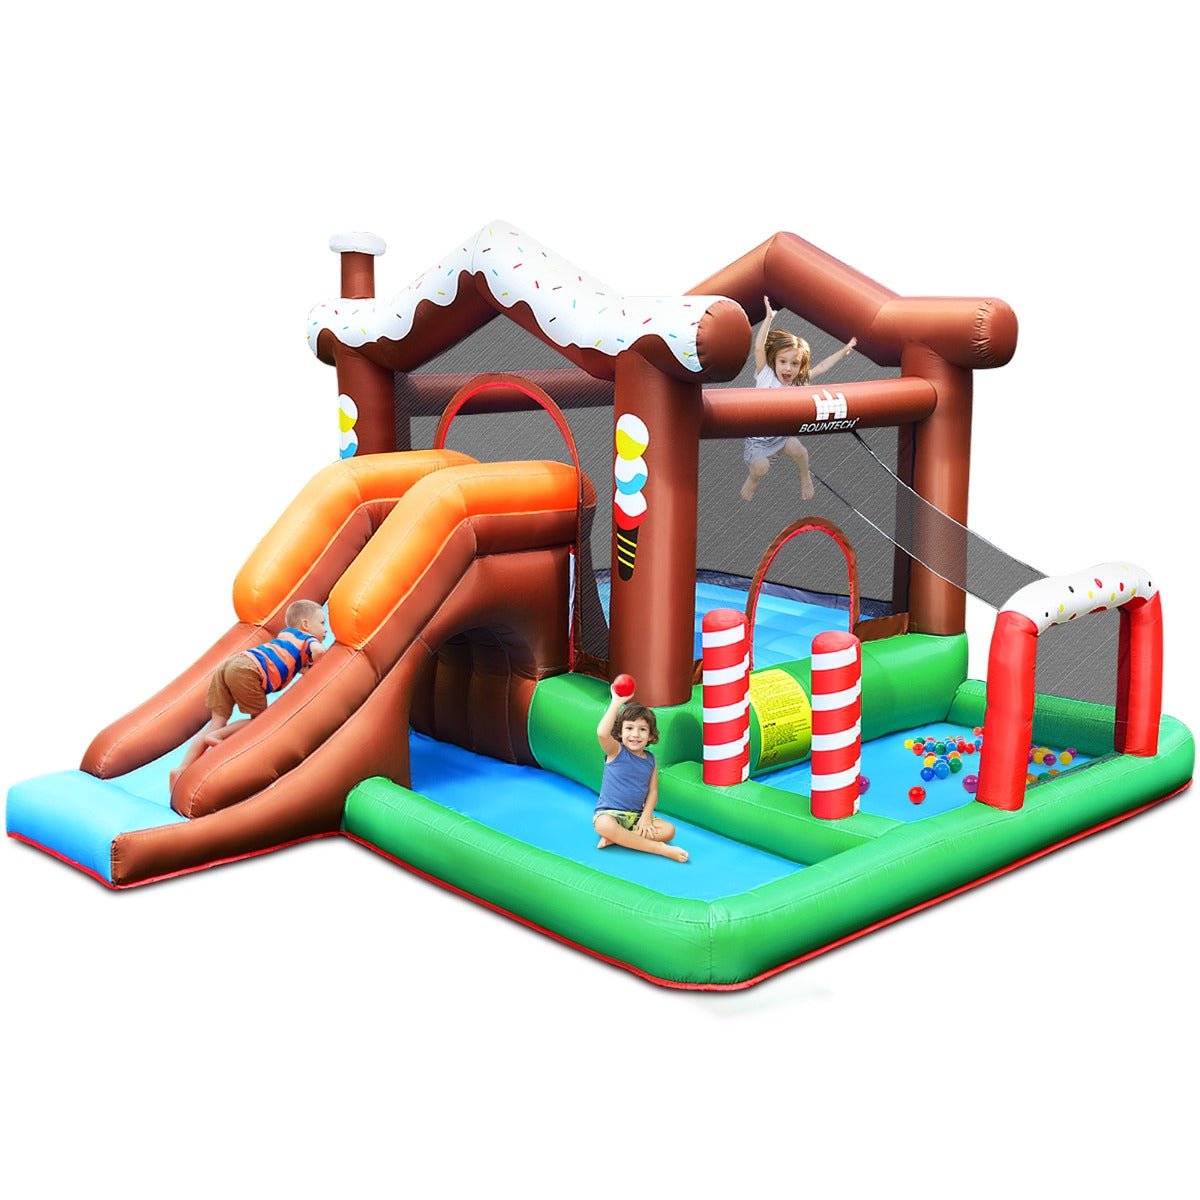 Inflatable Bounce Castle with Slide Park - Indoor/Outdoor Fun (Blower Included)